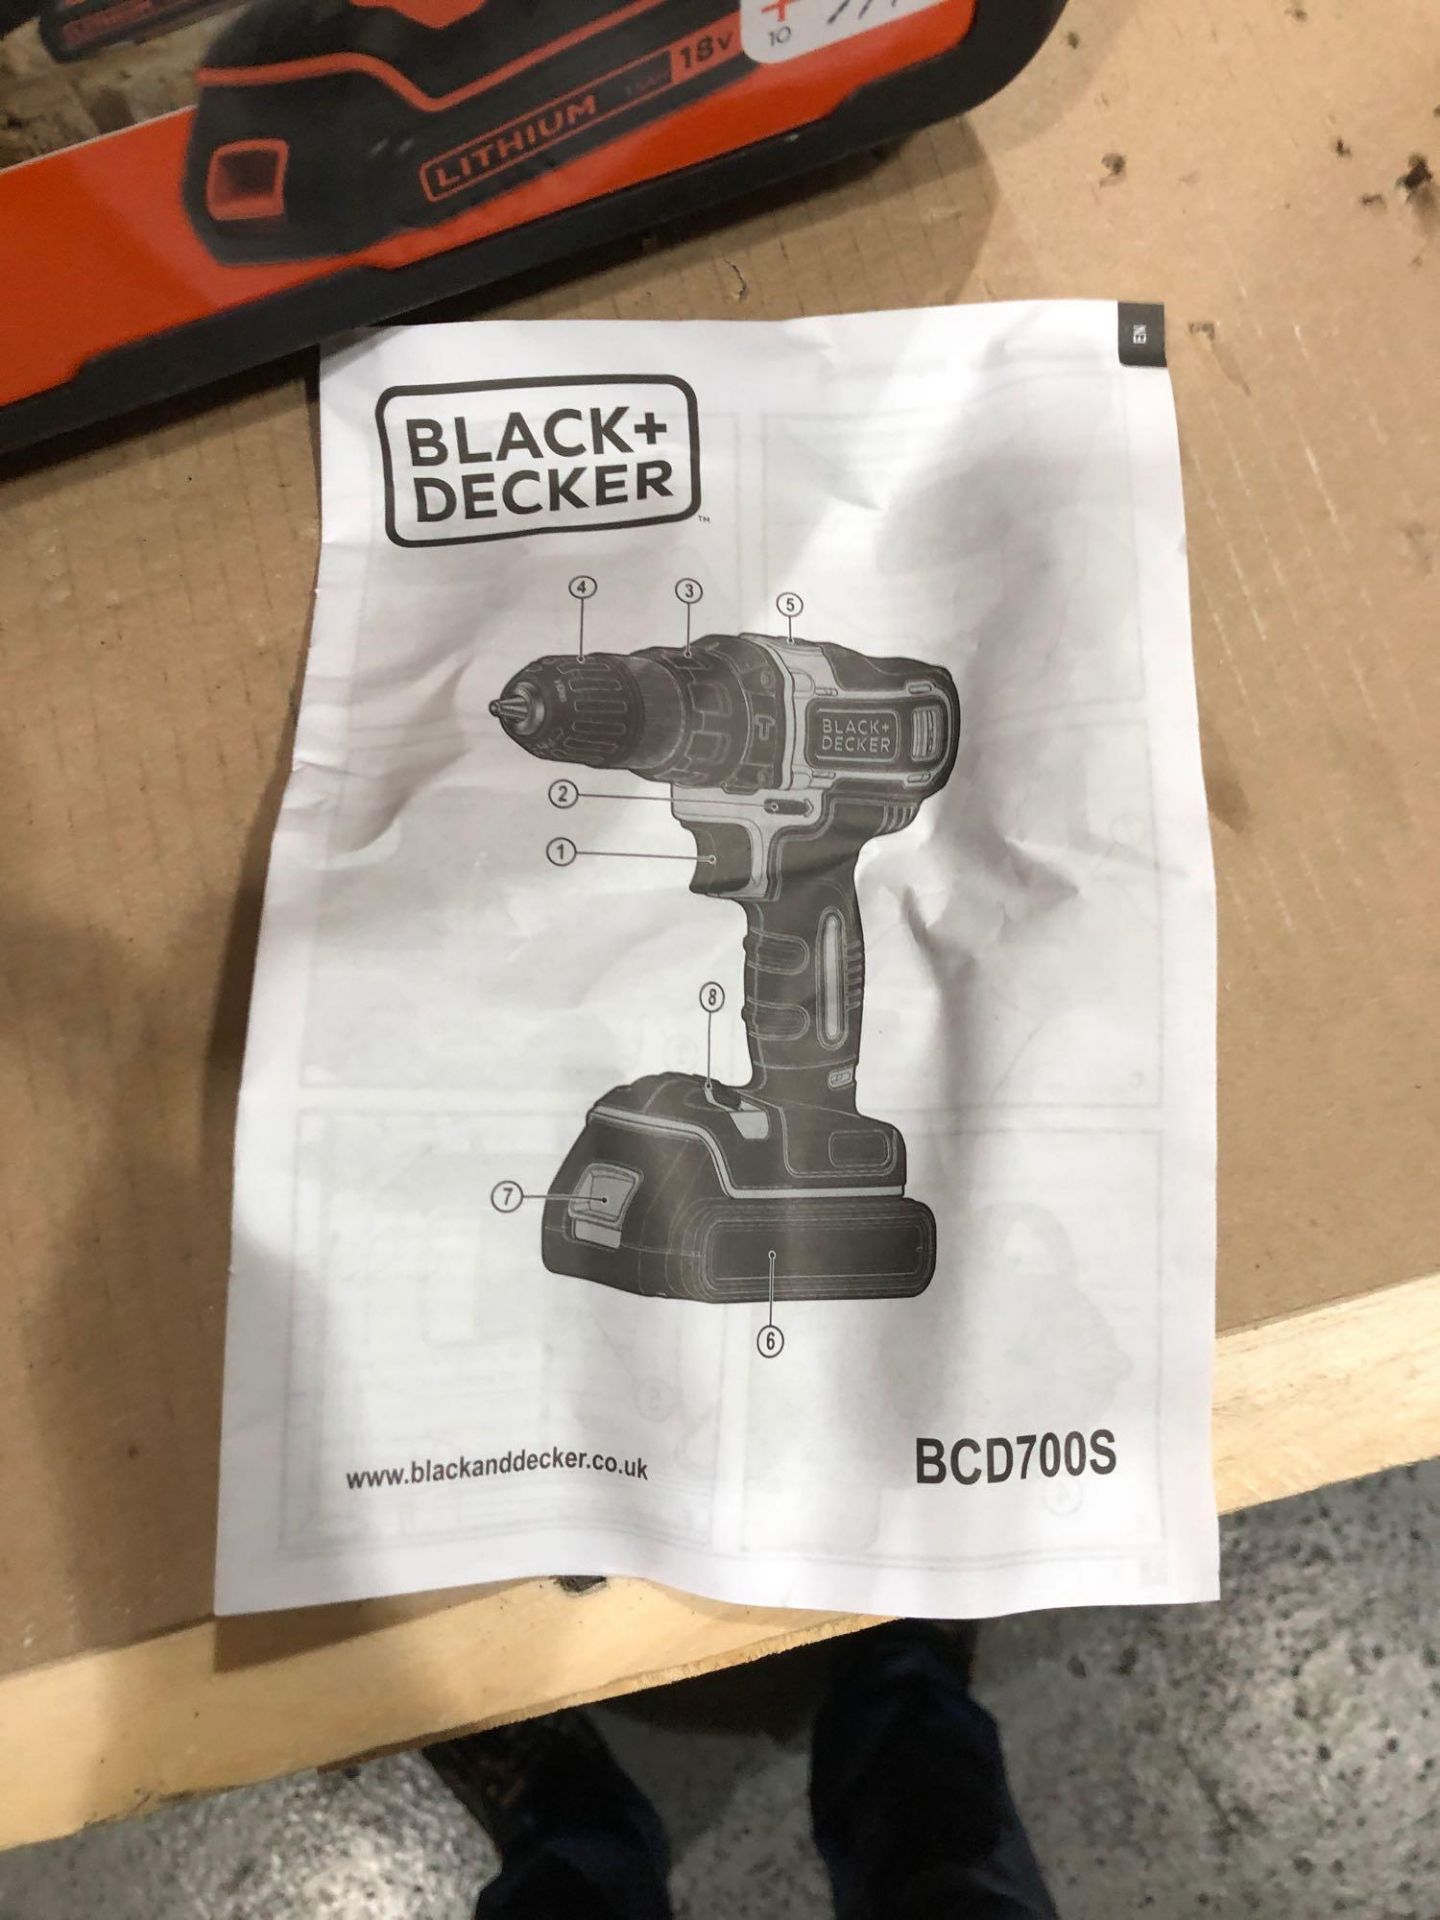 Black + Decker BCD700S1KA Hammer Drill with Battery - 18V £50.00 RRP - Image 7 of 8